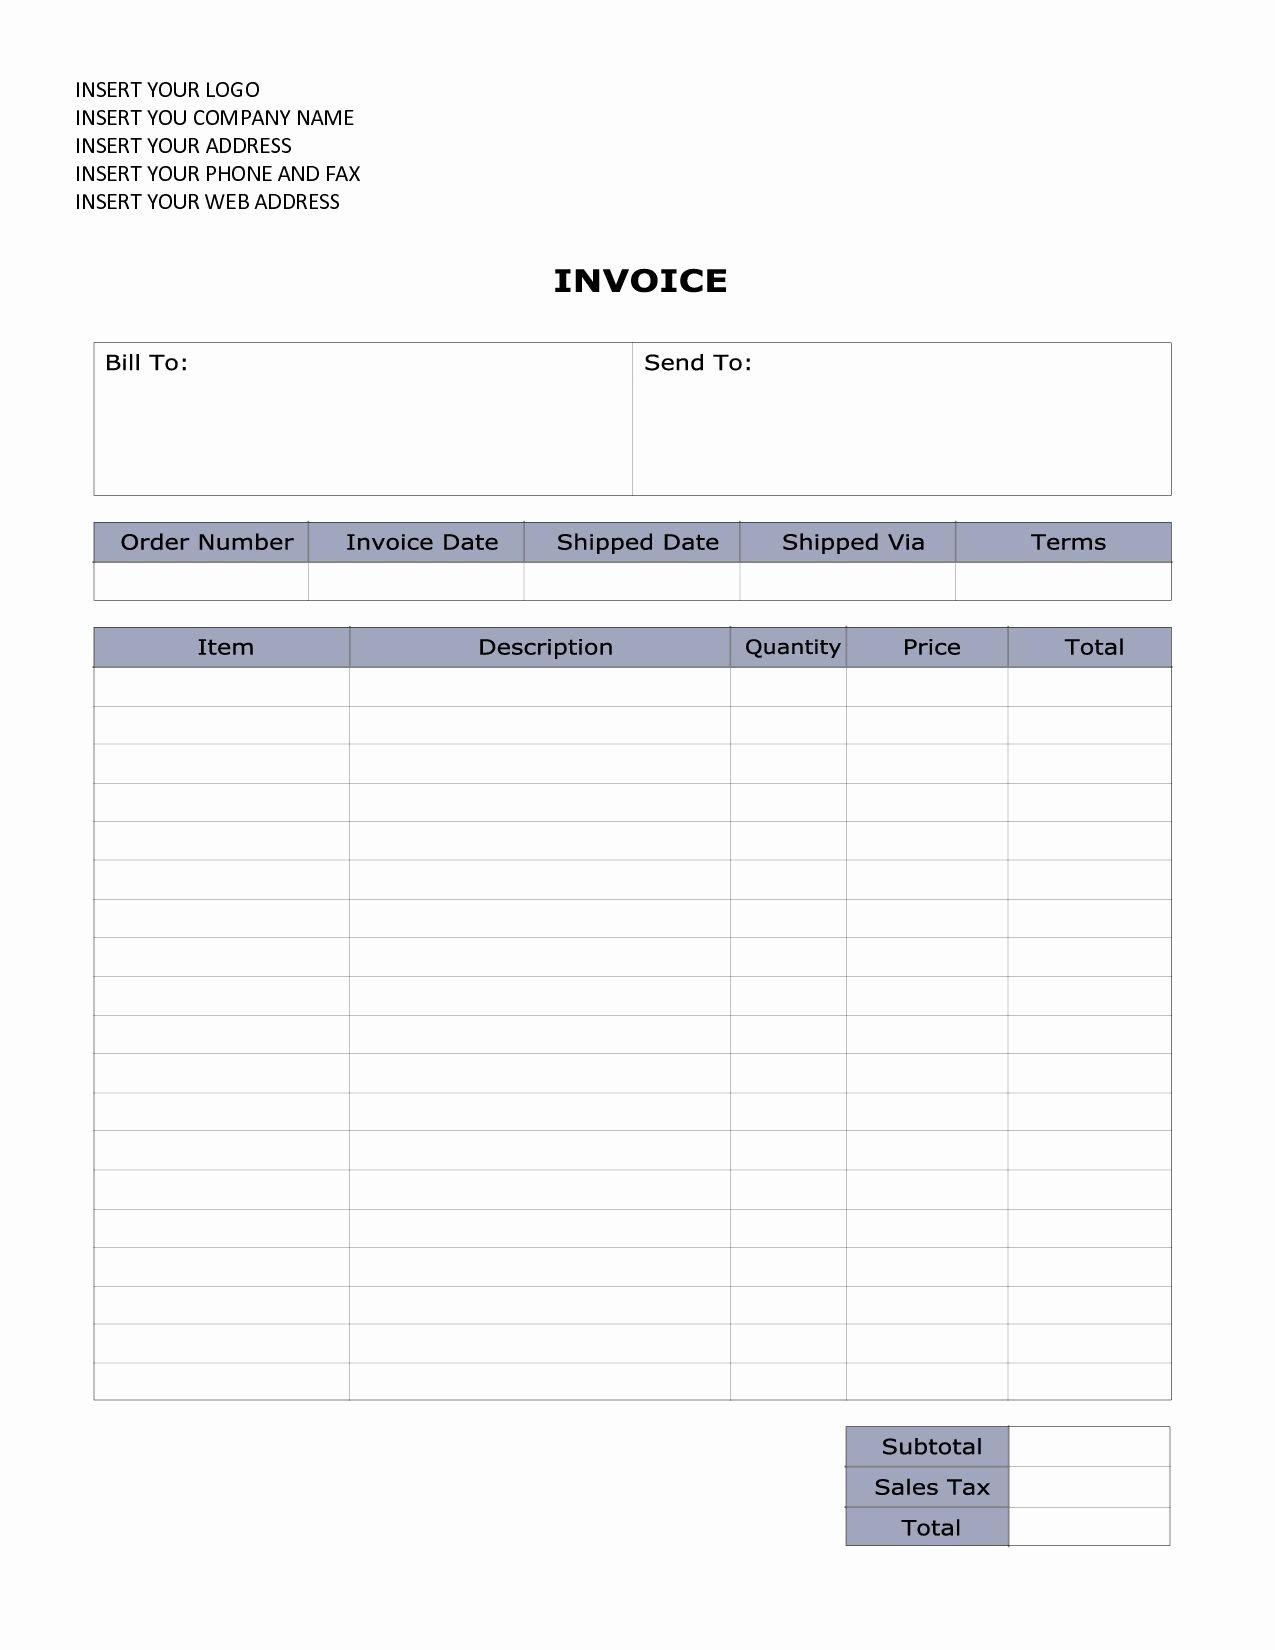 Word Document Invoice Template Sales Invoice Sample Word